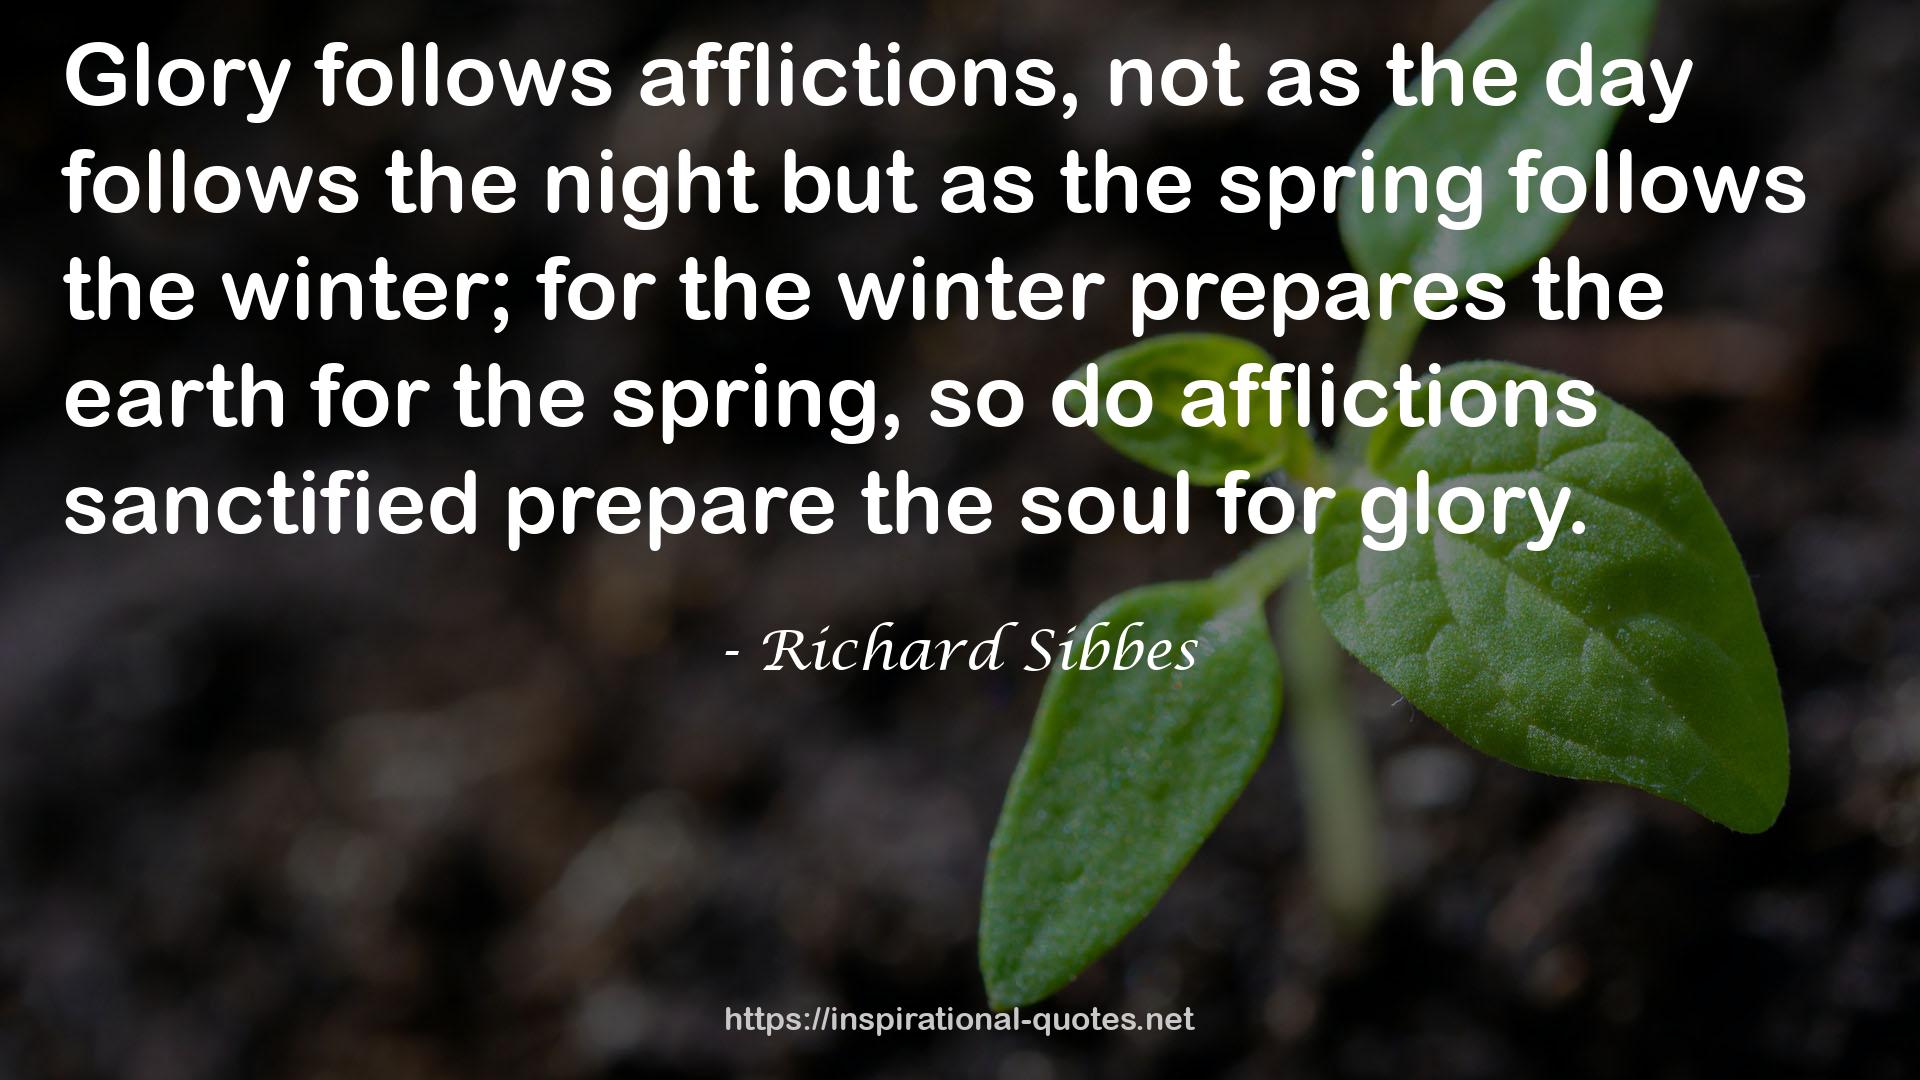 Richard Sibbes QUOTES